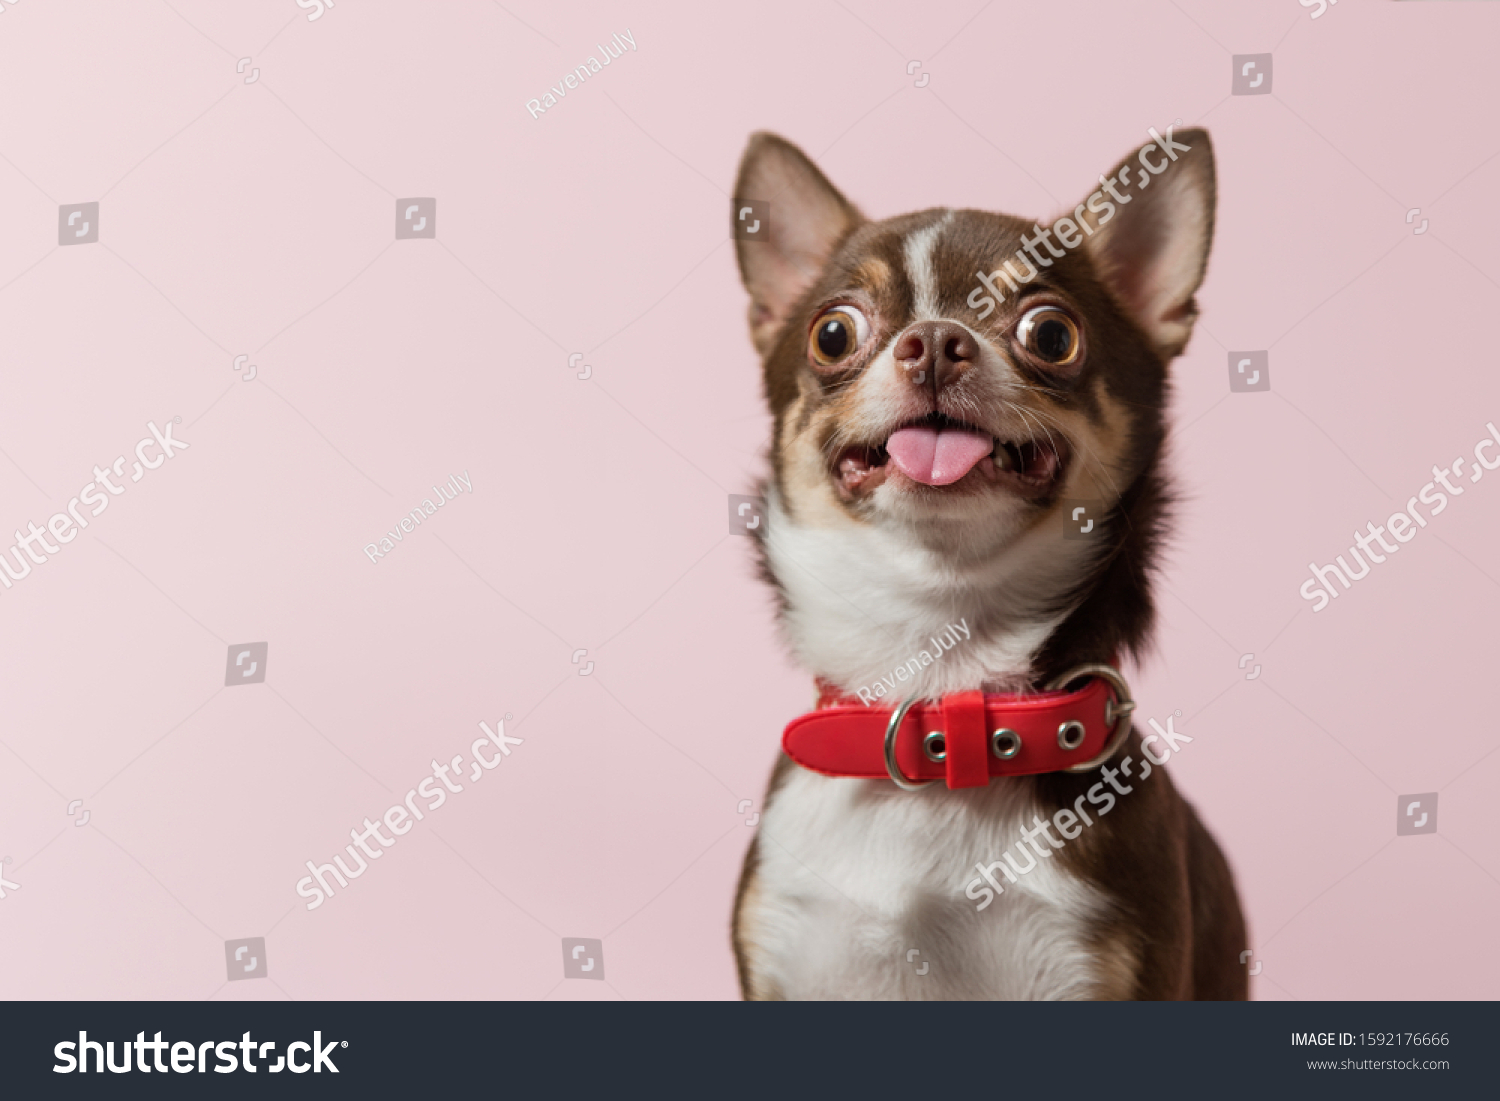 Cute brown mexican chihuahua dog with tongue out isolated on pink background. Dog looking to camera. Red collar. Copy Space #1592176666